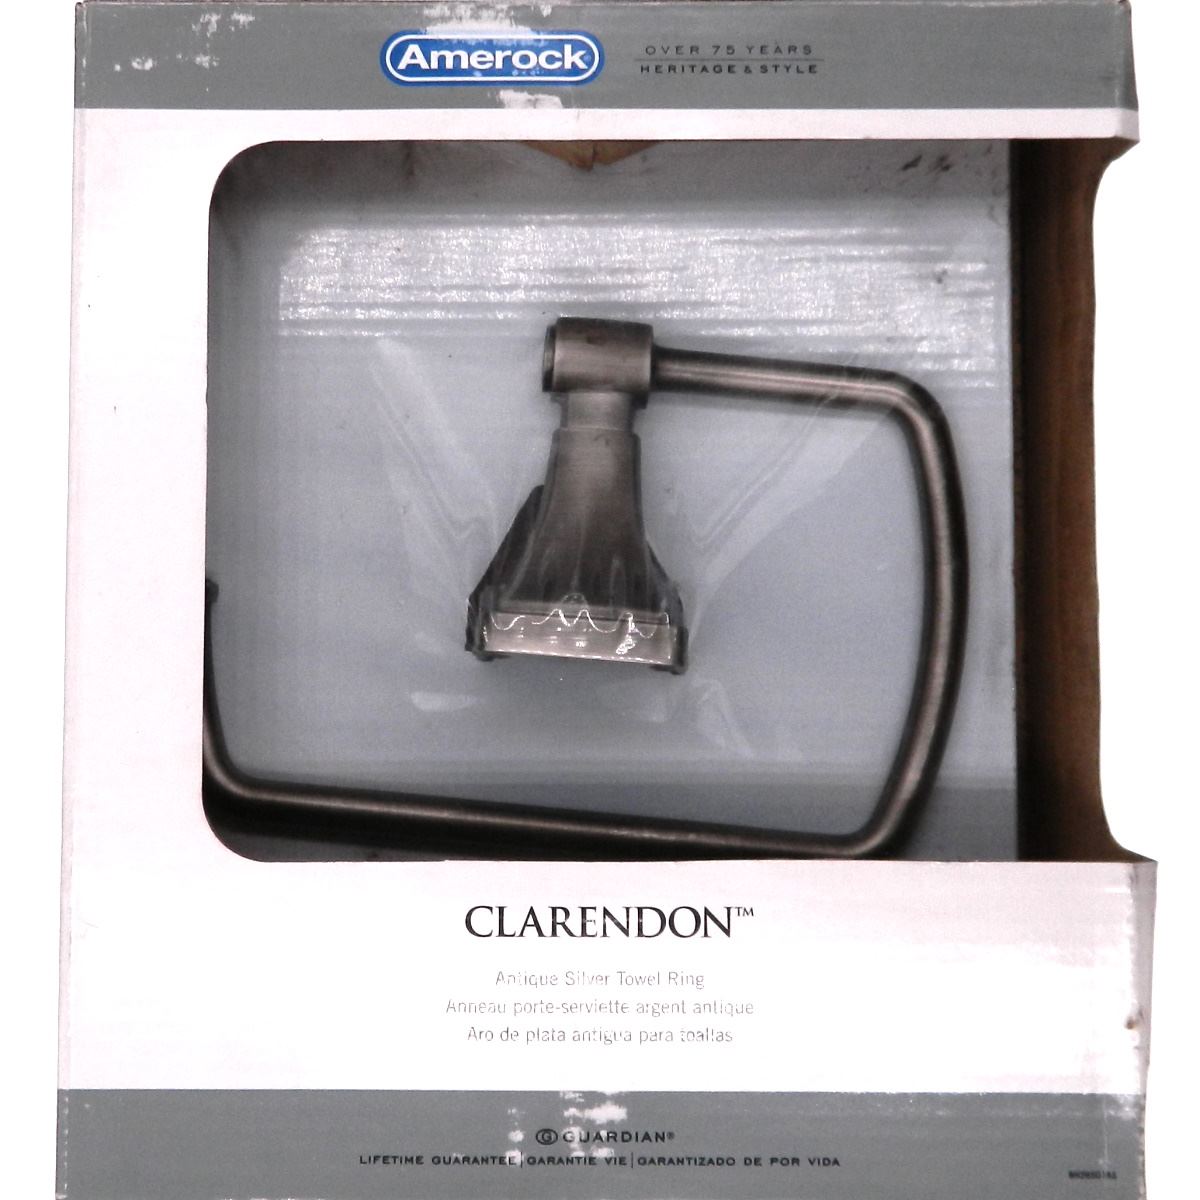 Amerock Clarendon Antique Silver Wall Mounted Bath Towel Ring BH26501-AS